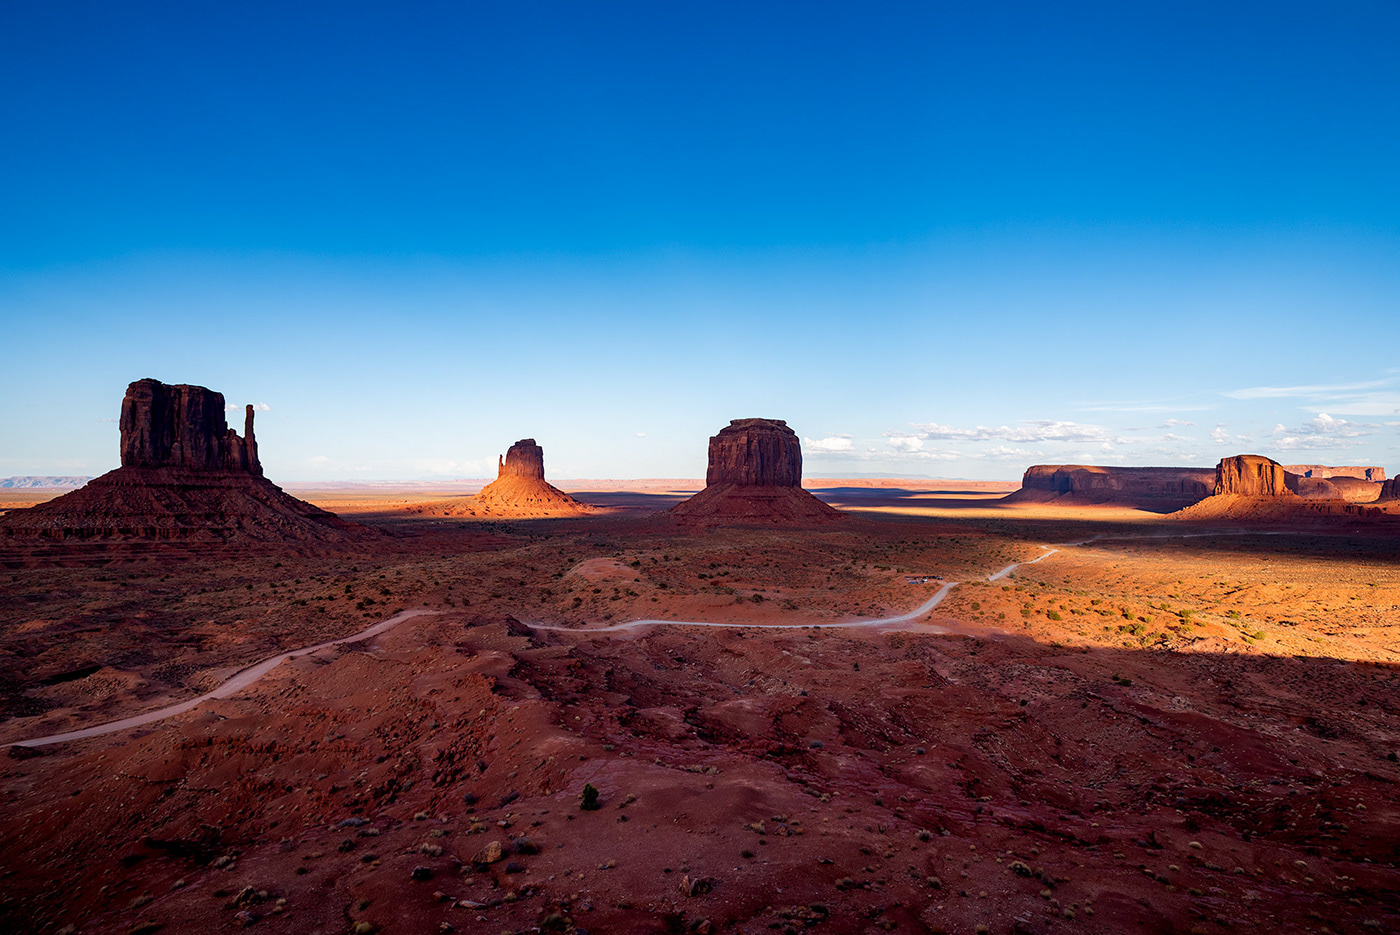 Sunset photography at Monument Valley by Jennifer Esseiva.